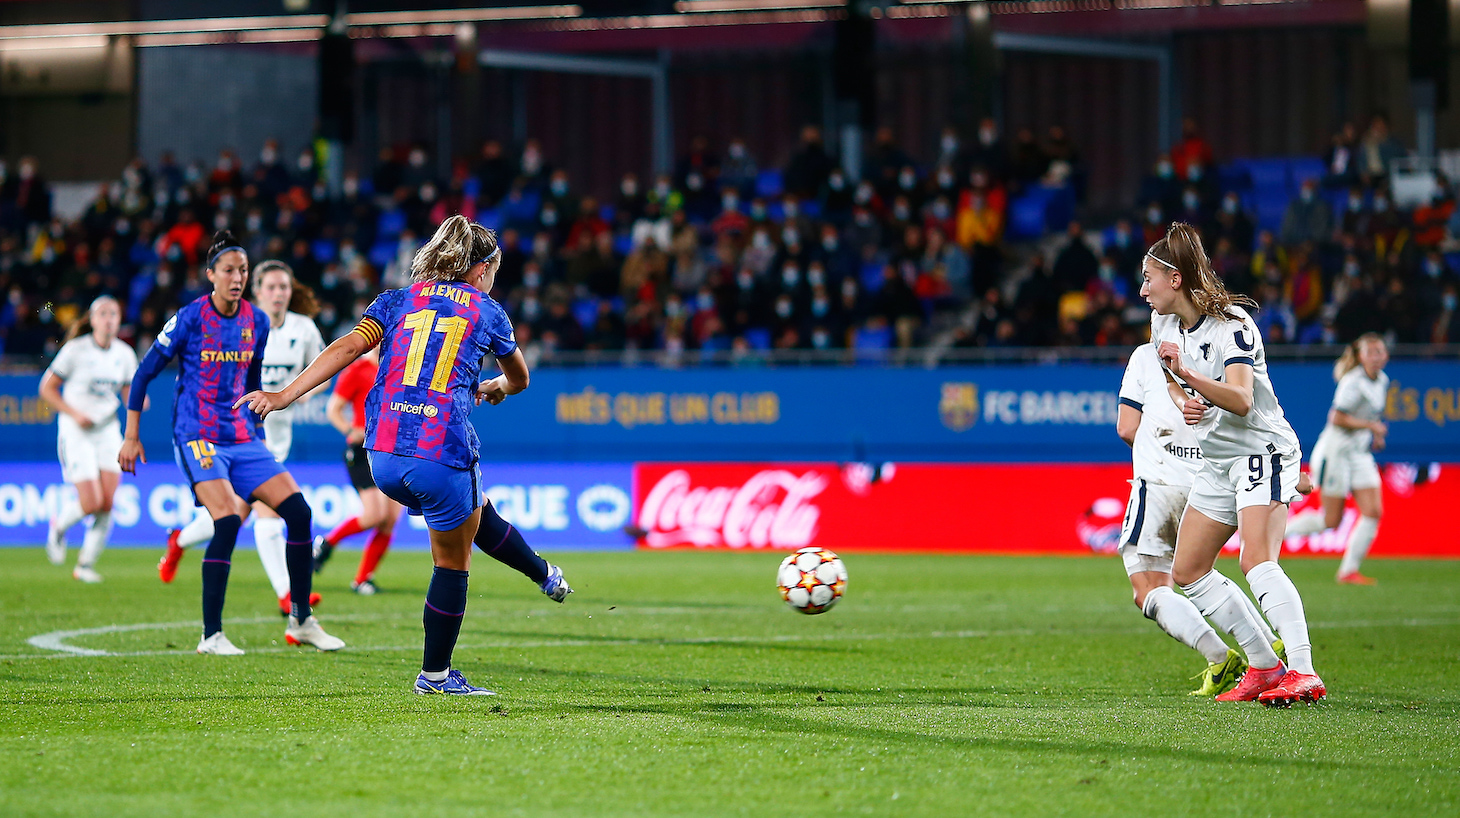 Alexia Putellas of FC Barcelona scores his side's 3rd goal during the UEFA Women's Champions League group C match between FC Barcelona and 1899 Hoffenheim at Estadi Johan Cruyff on November 10, 2021 in Barcelona, Spain.